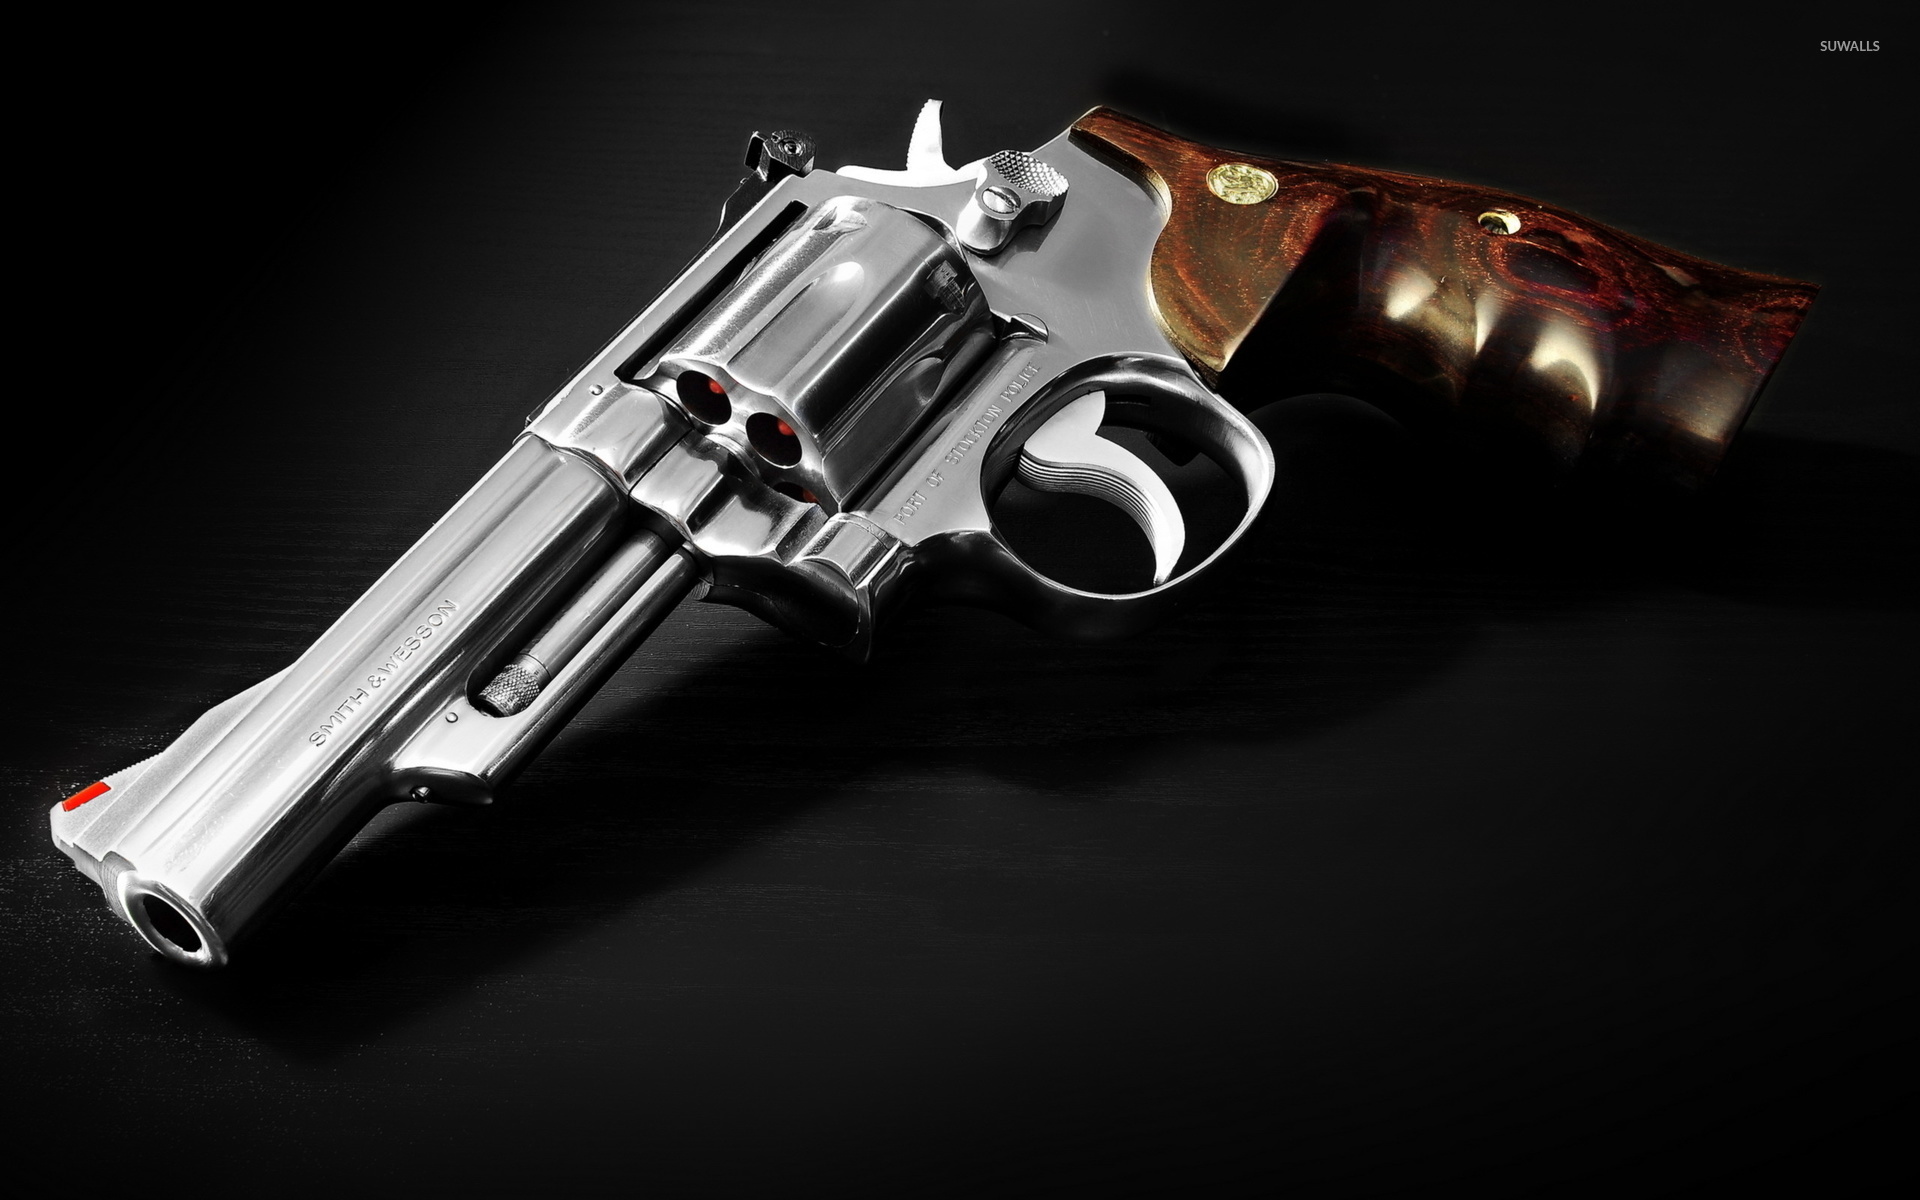 Smith Wesson Pistol Wallpaper Photography